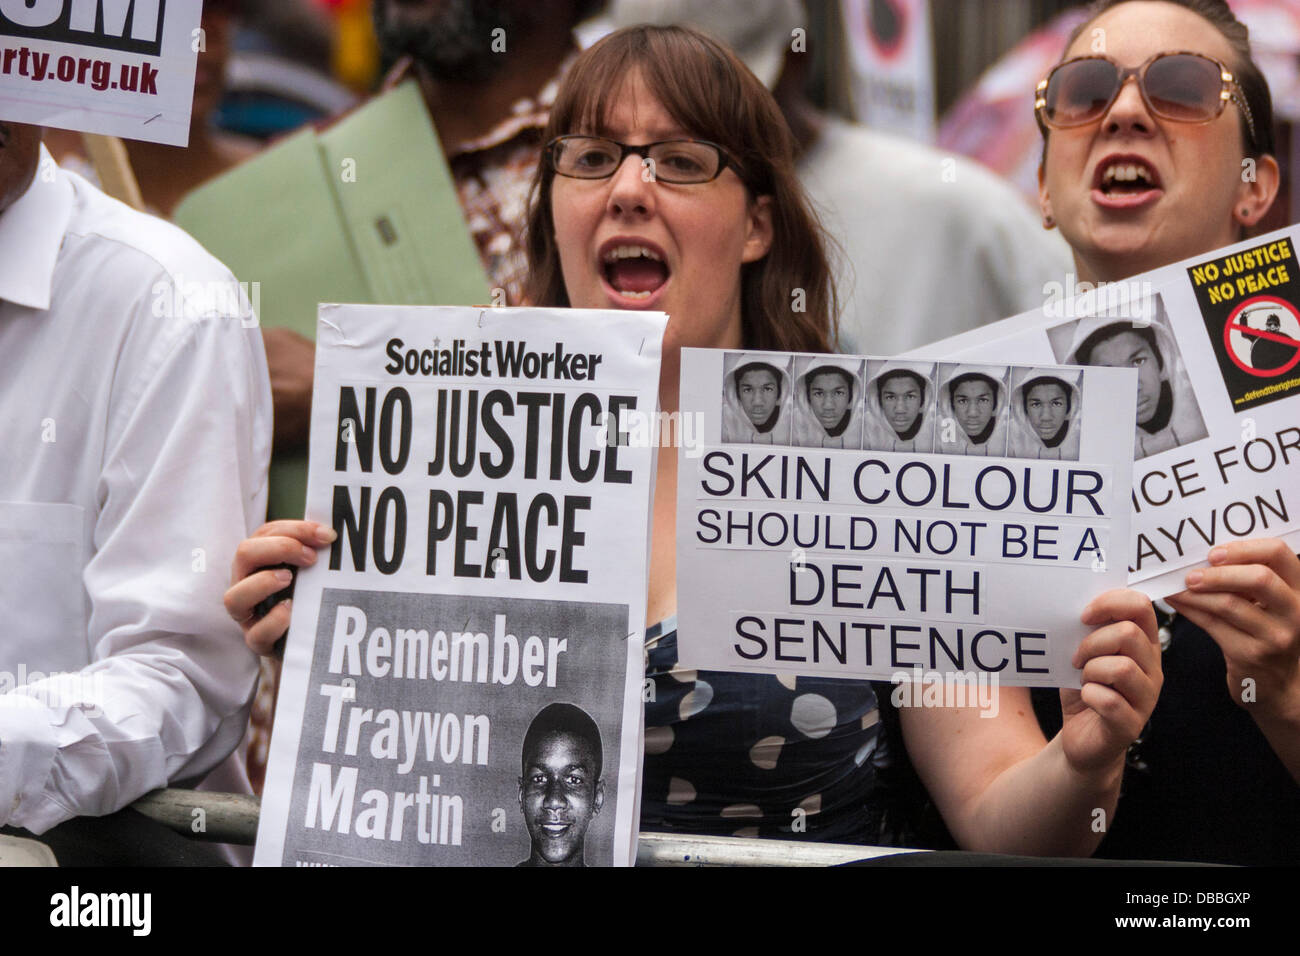 London, UK. 27th July, 2013. A woman chants slogans on the march from the US embassy to Downing street demanding Justice for Trayvon Martin, a black American teenager shot dead. His killer, George Zimmerman, was acquitted. Credit:  Paul Davey/Alamy Live News Stock Photo